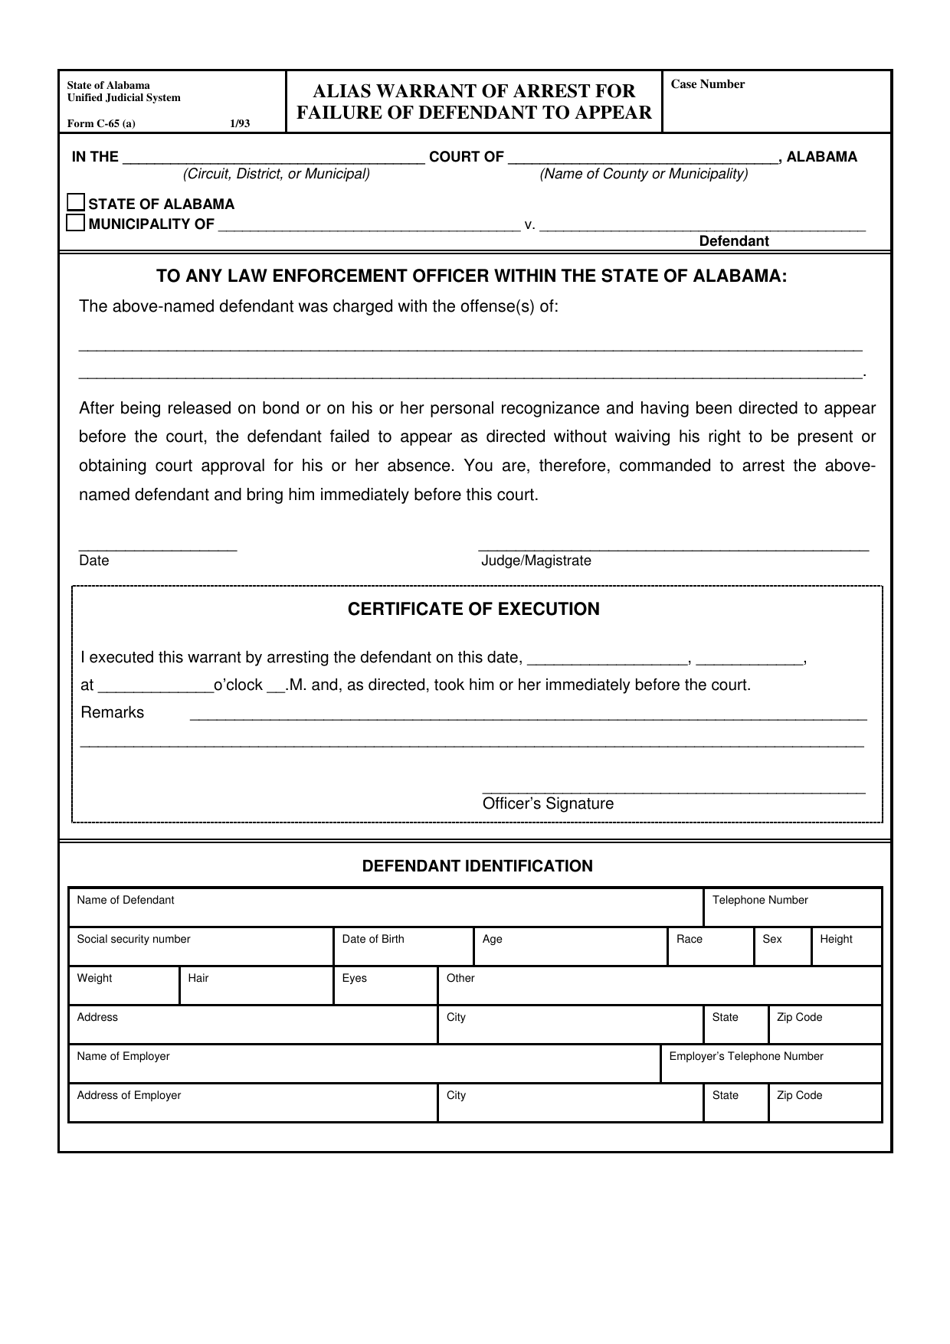 Form C-65(A) Alias Warrant of Arrest for Failure of Defendant to Appear - Alabama, Page 1